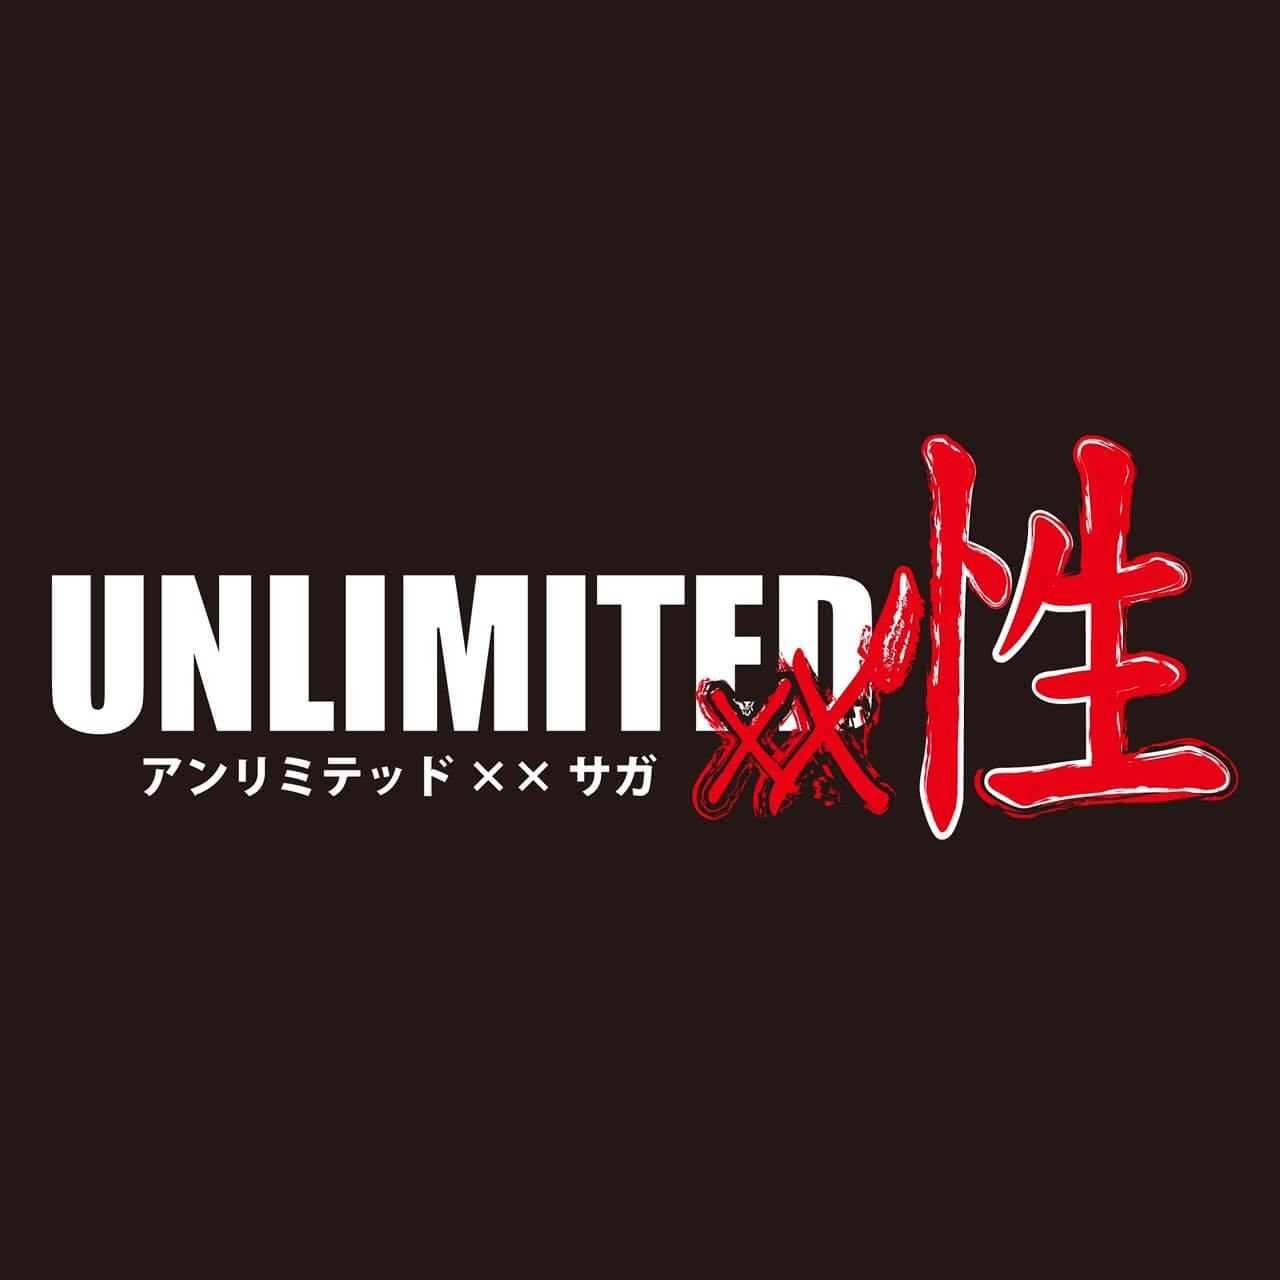 Visual Laboratory changes name to UNLIMITED××性 and new start